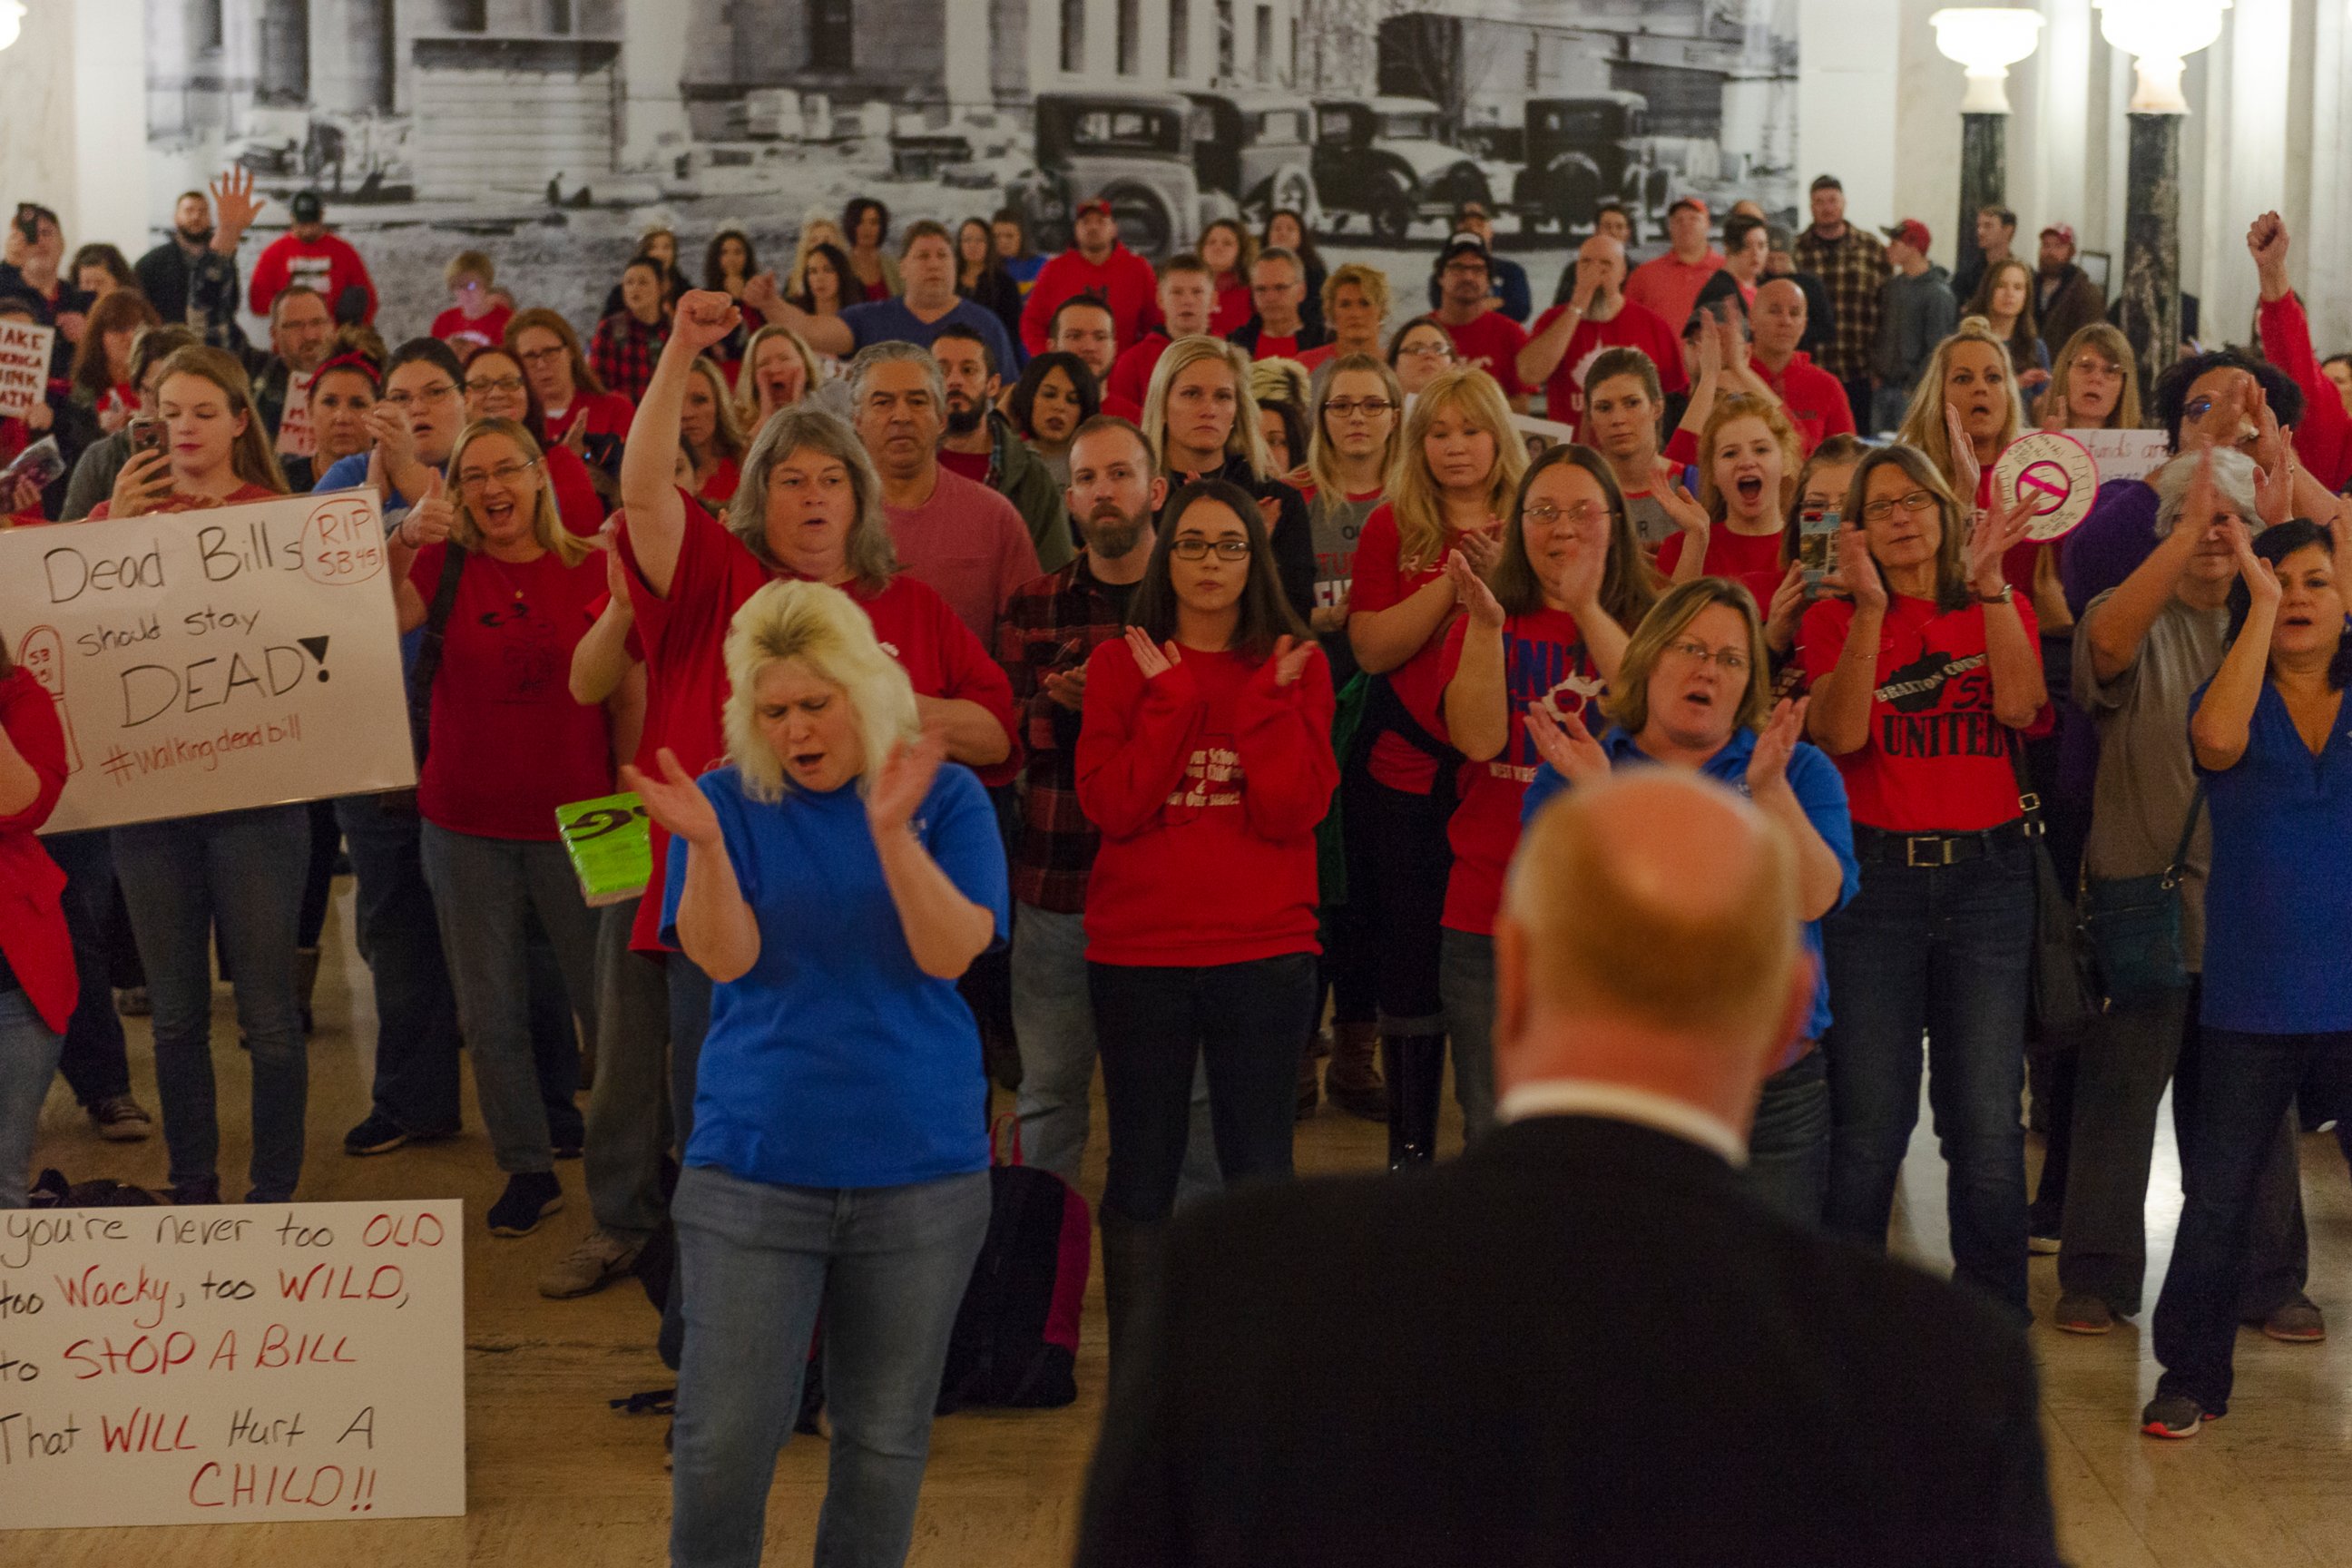 Teachers and school personnel clap as West Virginia Education Association President Dale Lee speaks in front of the House of Delegates chamber at the West Virginia State Capitol in Charleston, W.Va. on the second day of a statewide strike by teachers